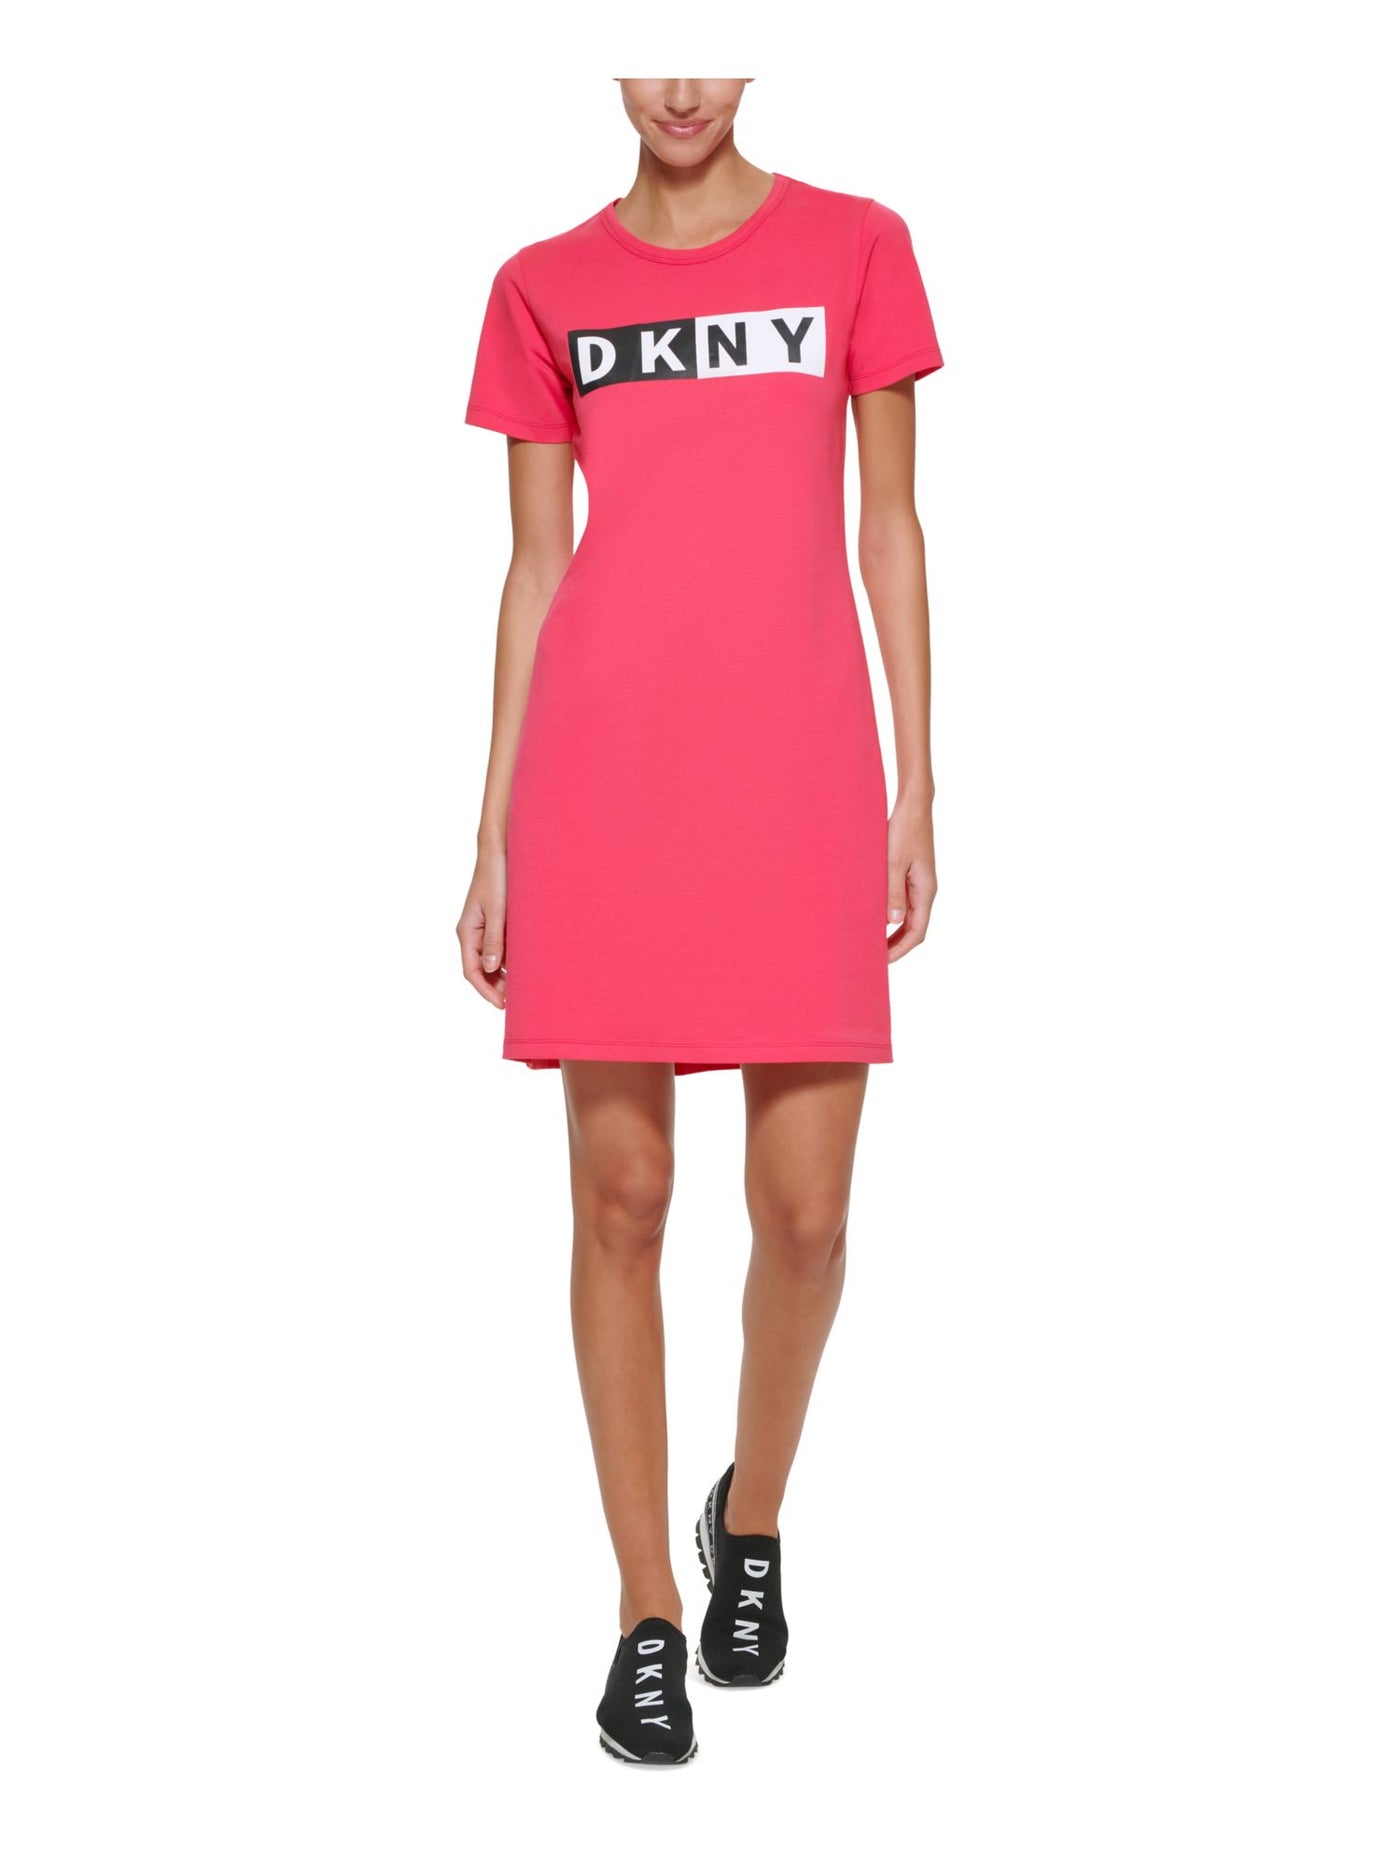 DKNY SPORT Womens Coral Logo Graphic Short Sleeve Crew Neck Above The Knee T-Shirt Dress S